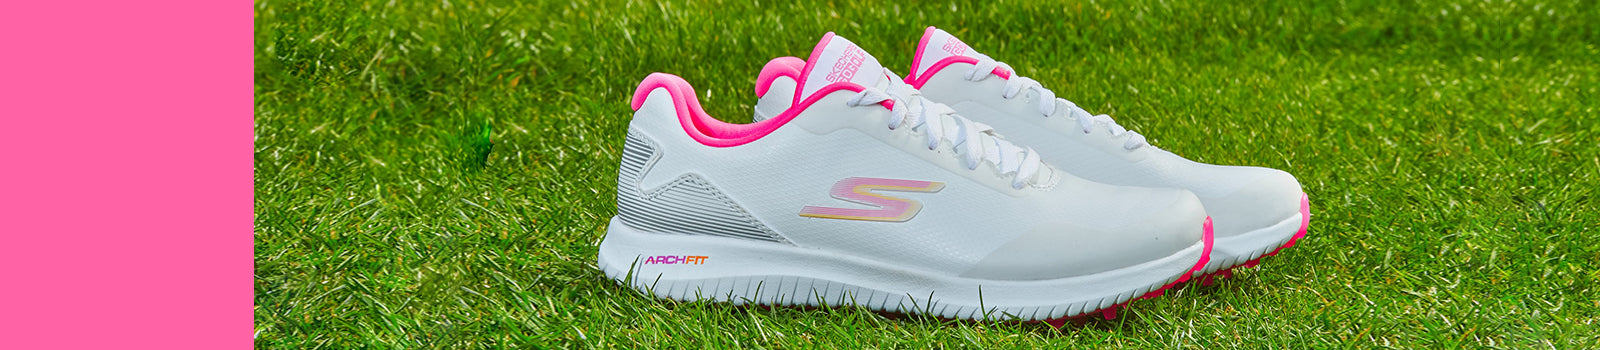 Skechers Women's golf shoes at GolfGarb including the Go Golf Max 2 in white and pink shown